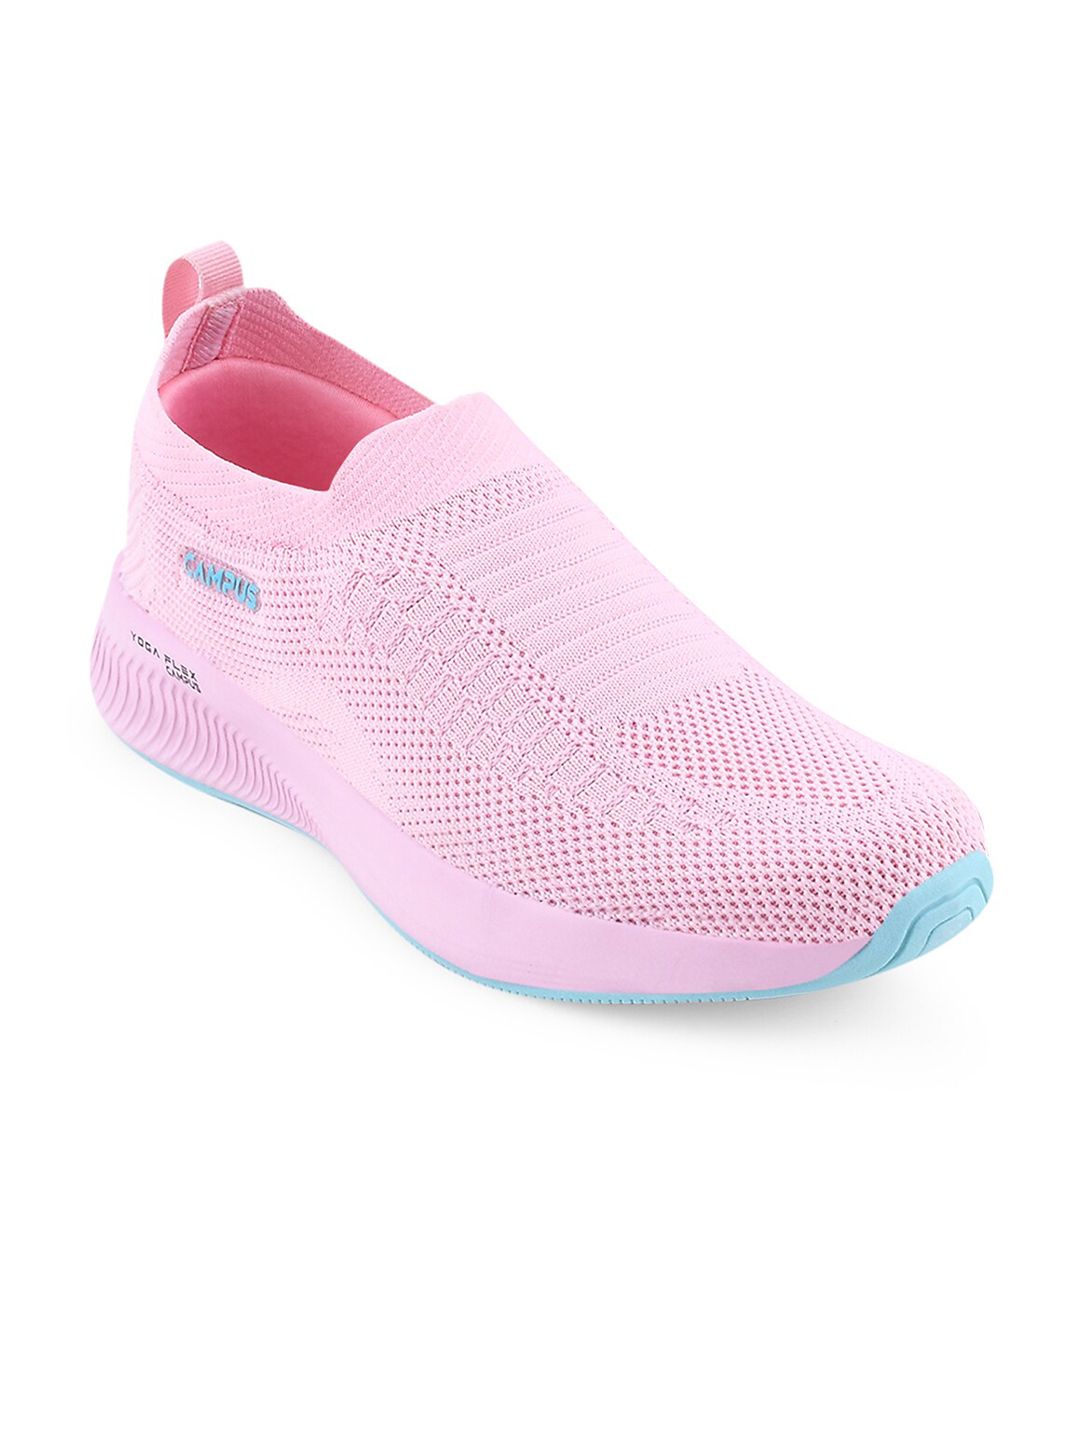 Campus Women Pink Textile Walking Non-Marking Shoes Price in India